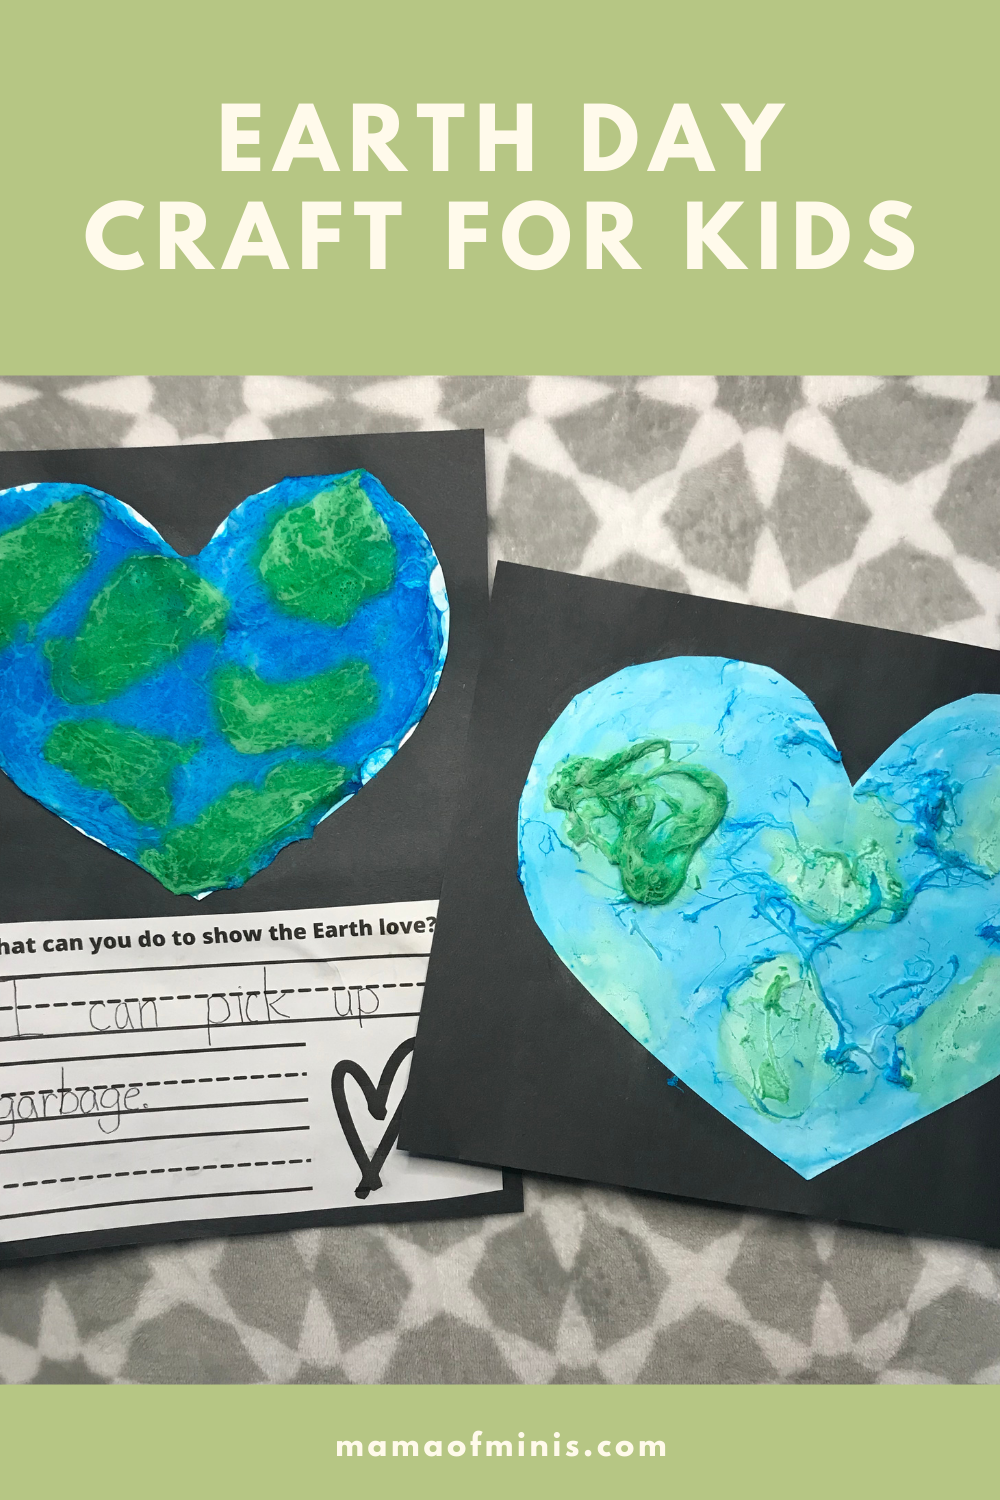 Earth Day Craft for Kids and Writing Prompt